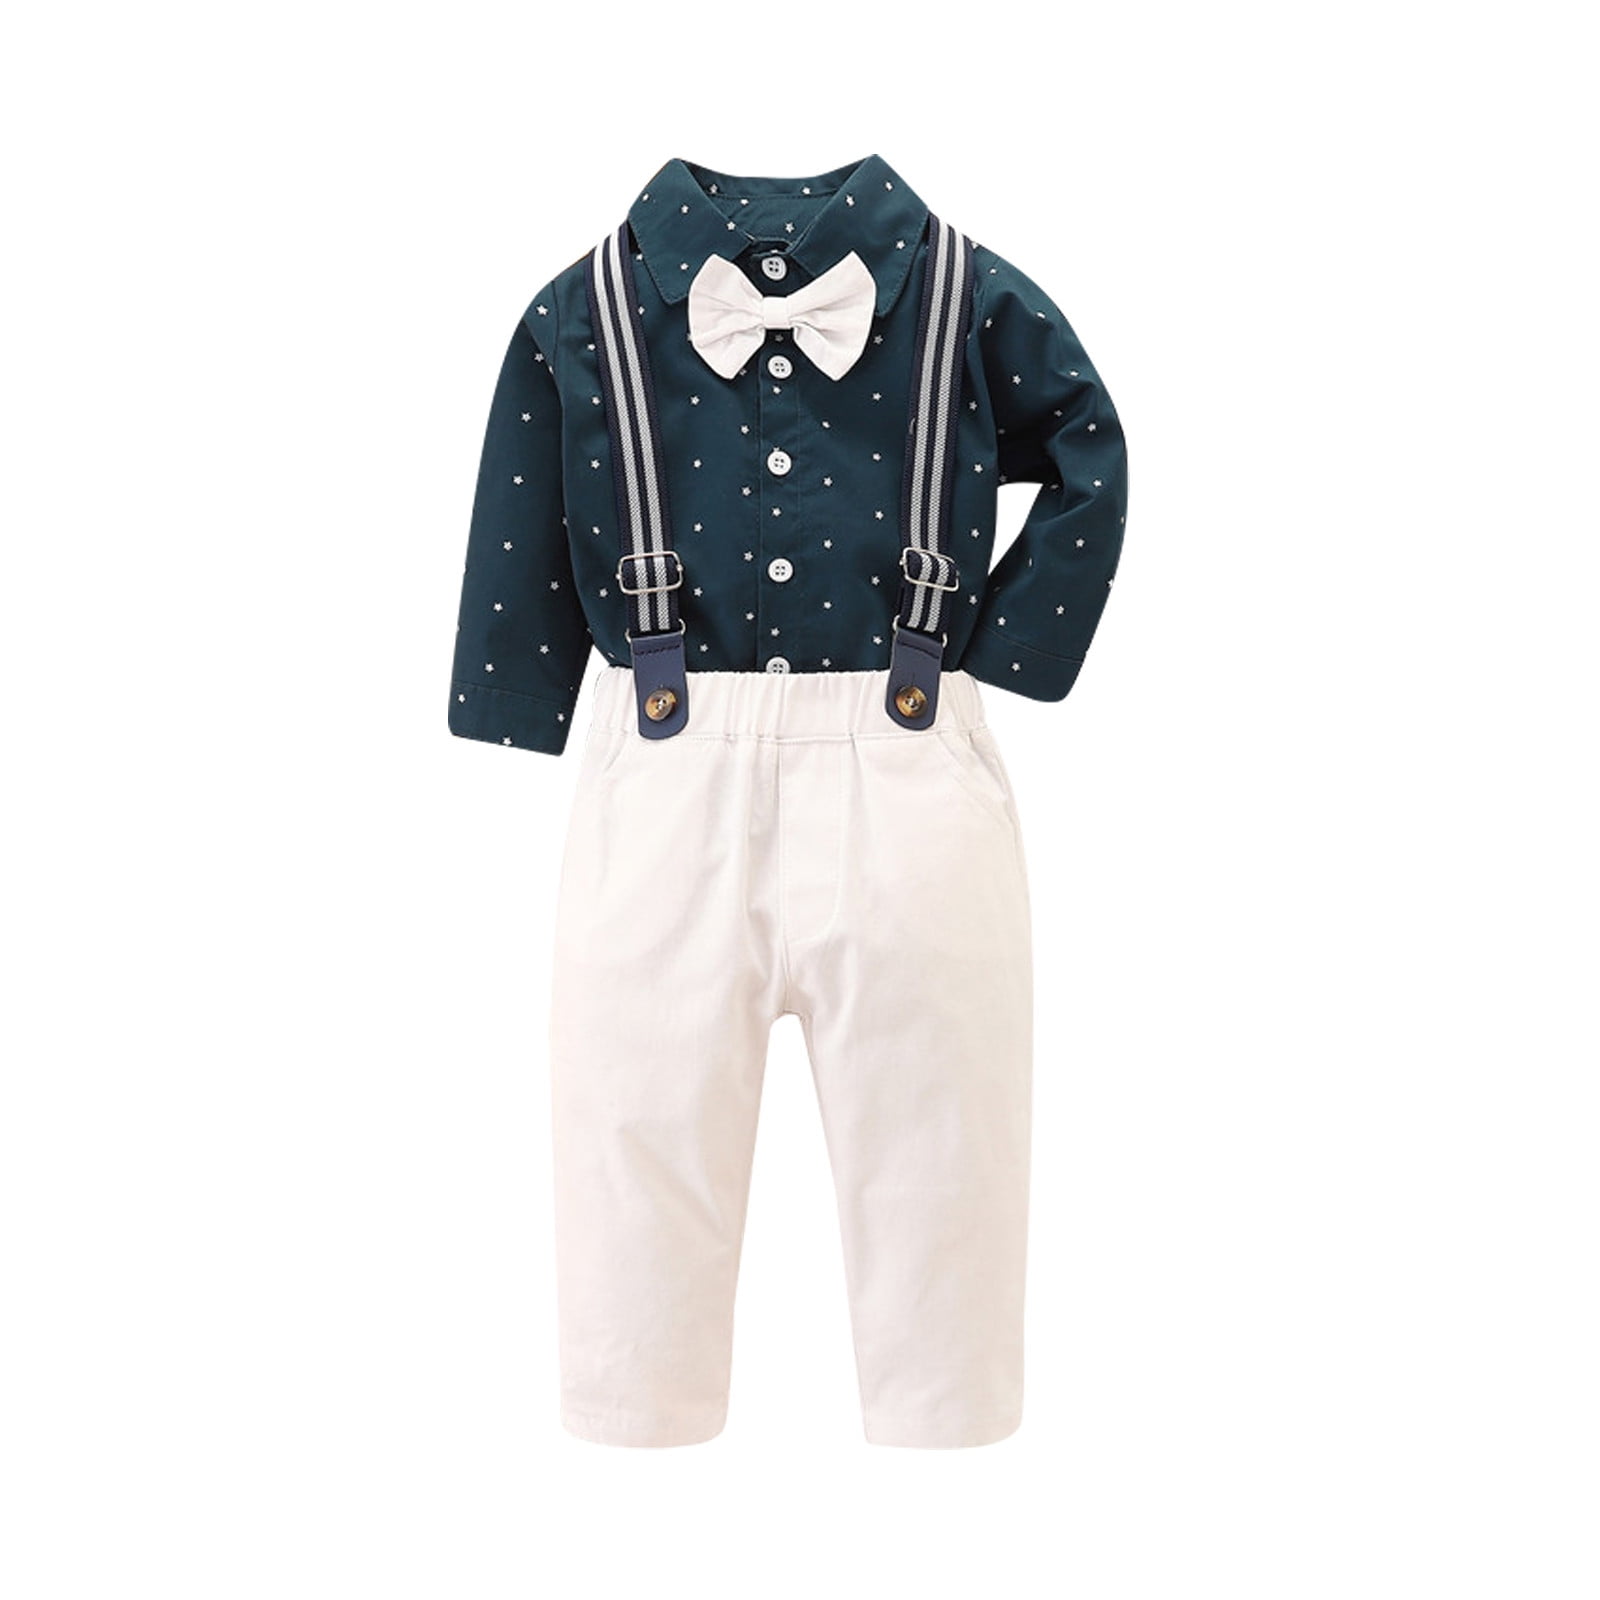 Ferenyi US Baby Boys Bowtie Gentleman Romper Jumpsuit Overalls Rompers (0-6  months, White). For pro… | Baby boy dress, Baby clothes online, Fashionable baby  clothes